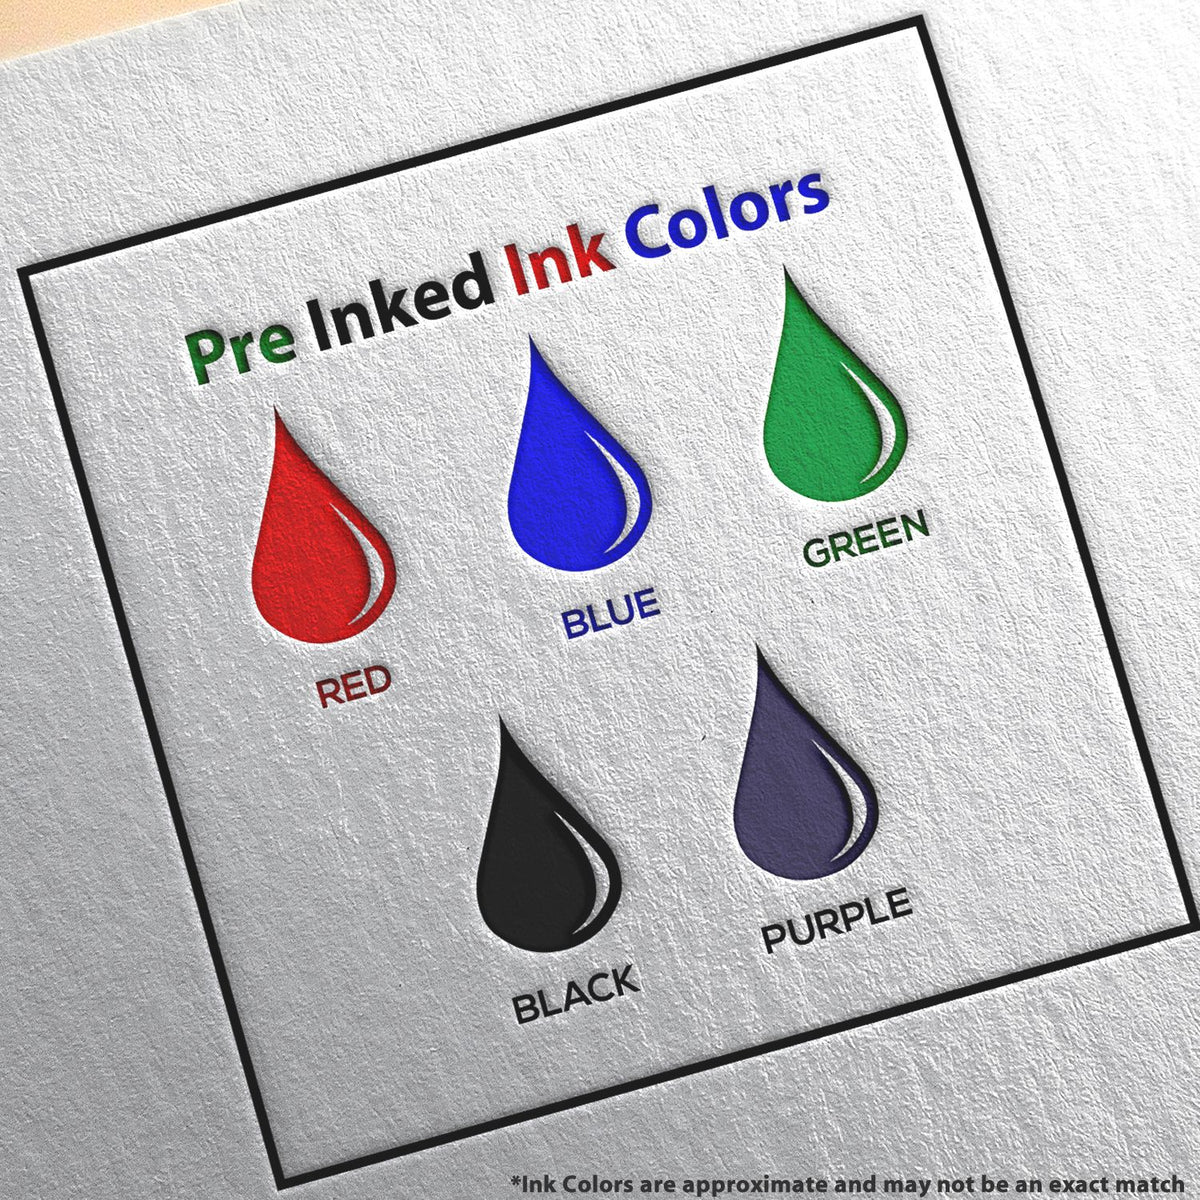 A picture showing the different ink colors or hues available for the Premium MaxLight Pre-Inked Nebraska Engineering Stamp product.